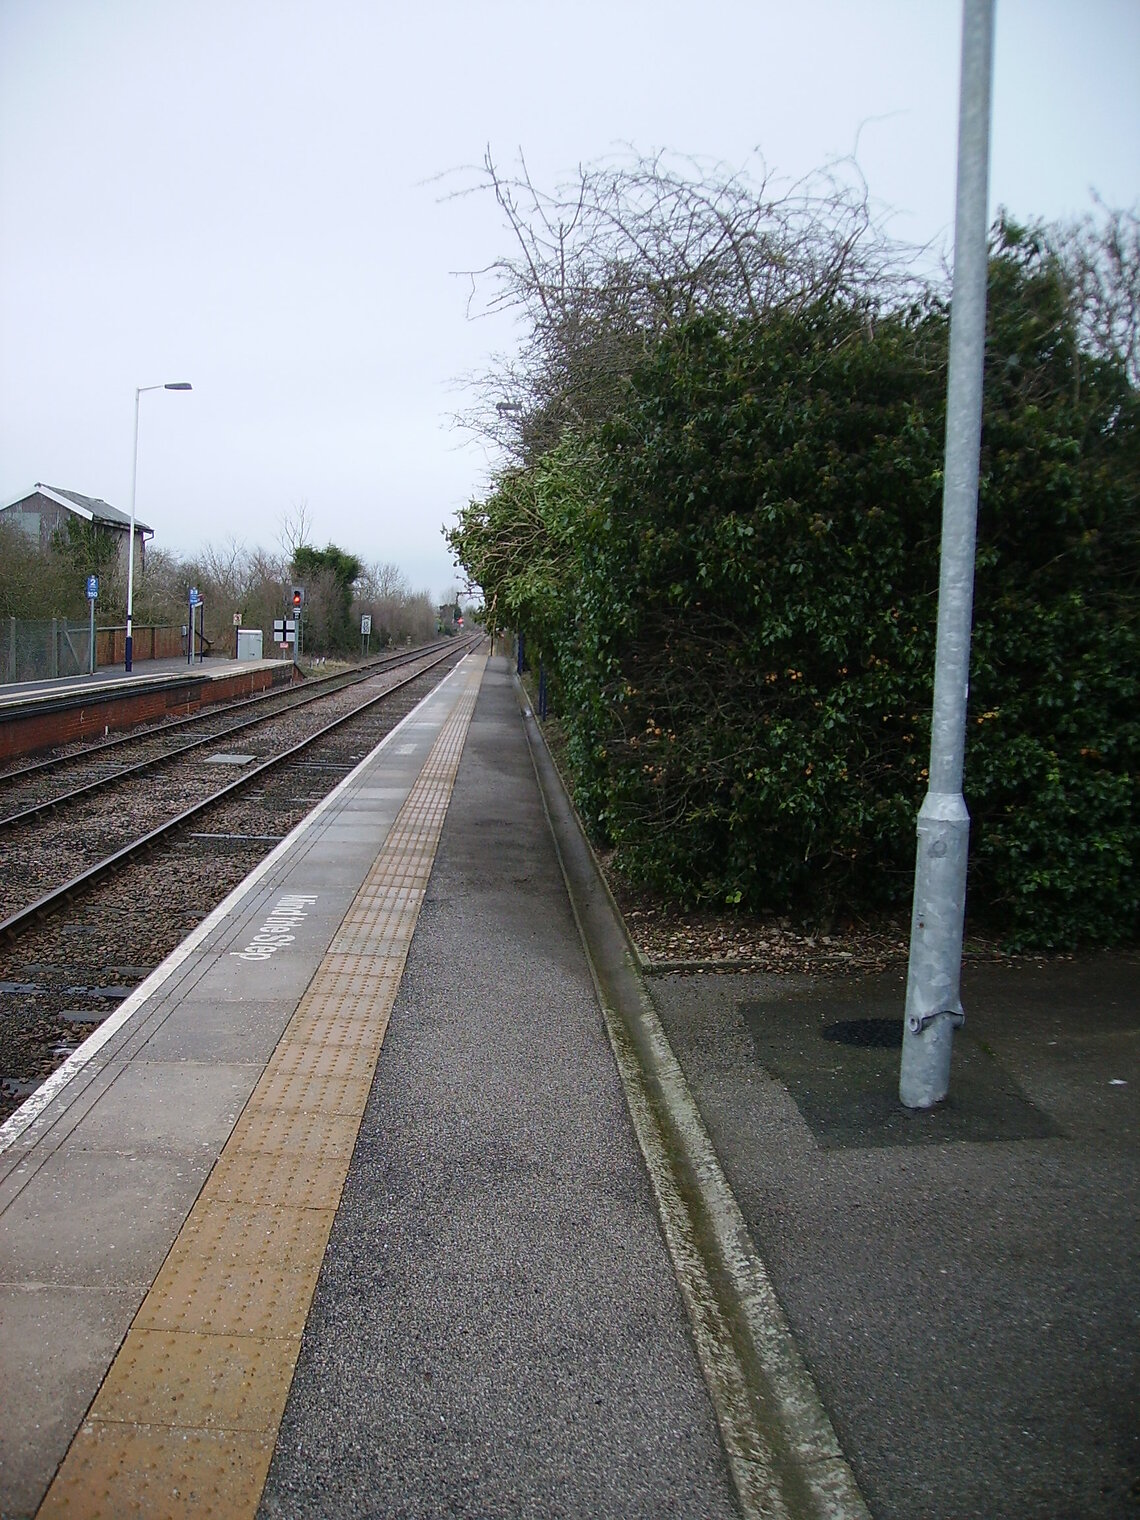 Platform 1 at Hunmanby towards Scarborough prior to starting work on the over grown hedge